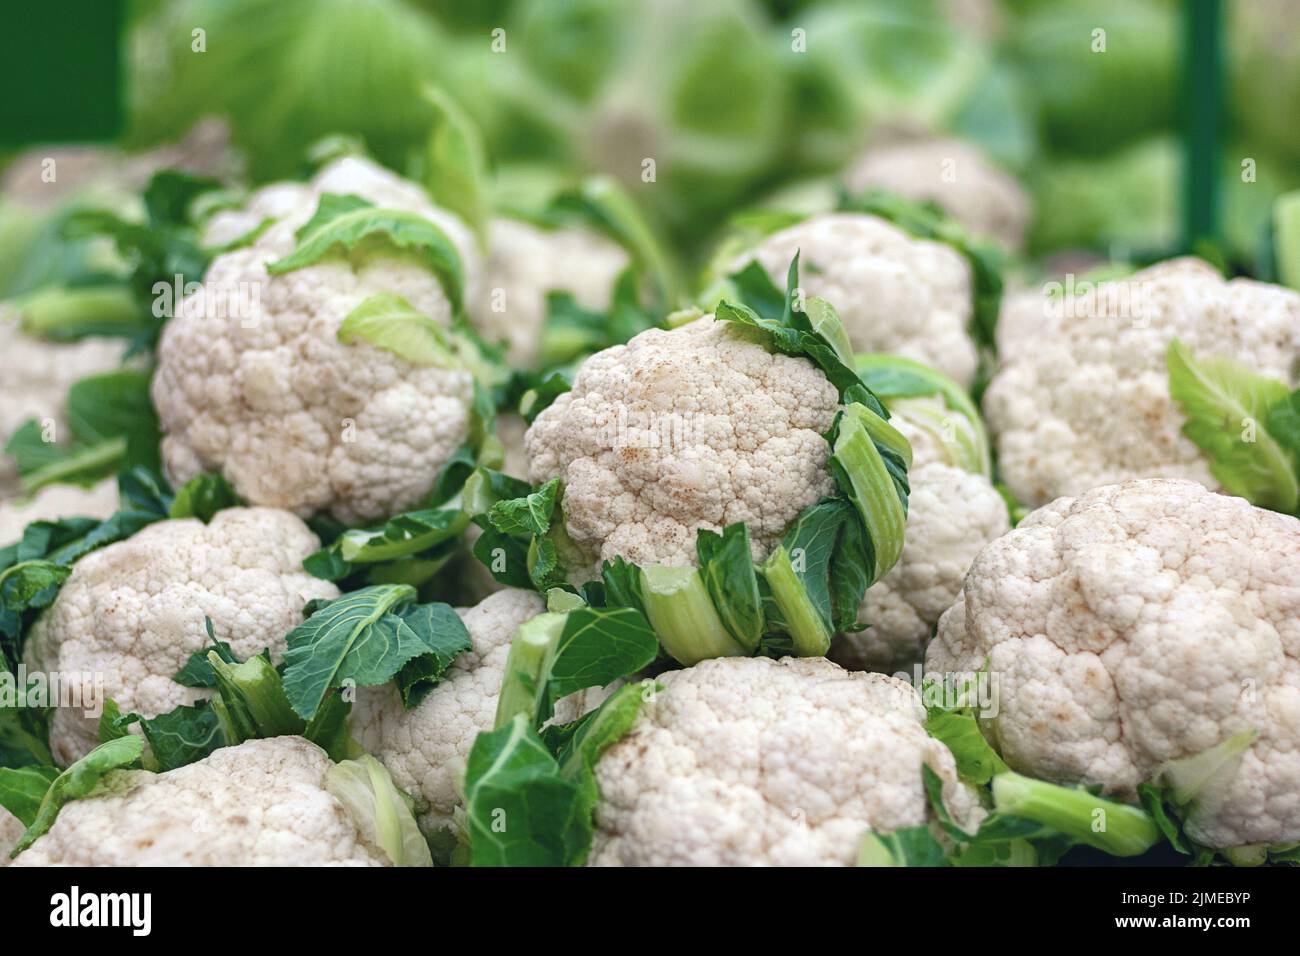 Cauliflower and cabbage sale at organic vegetable market Stock Photo